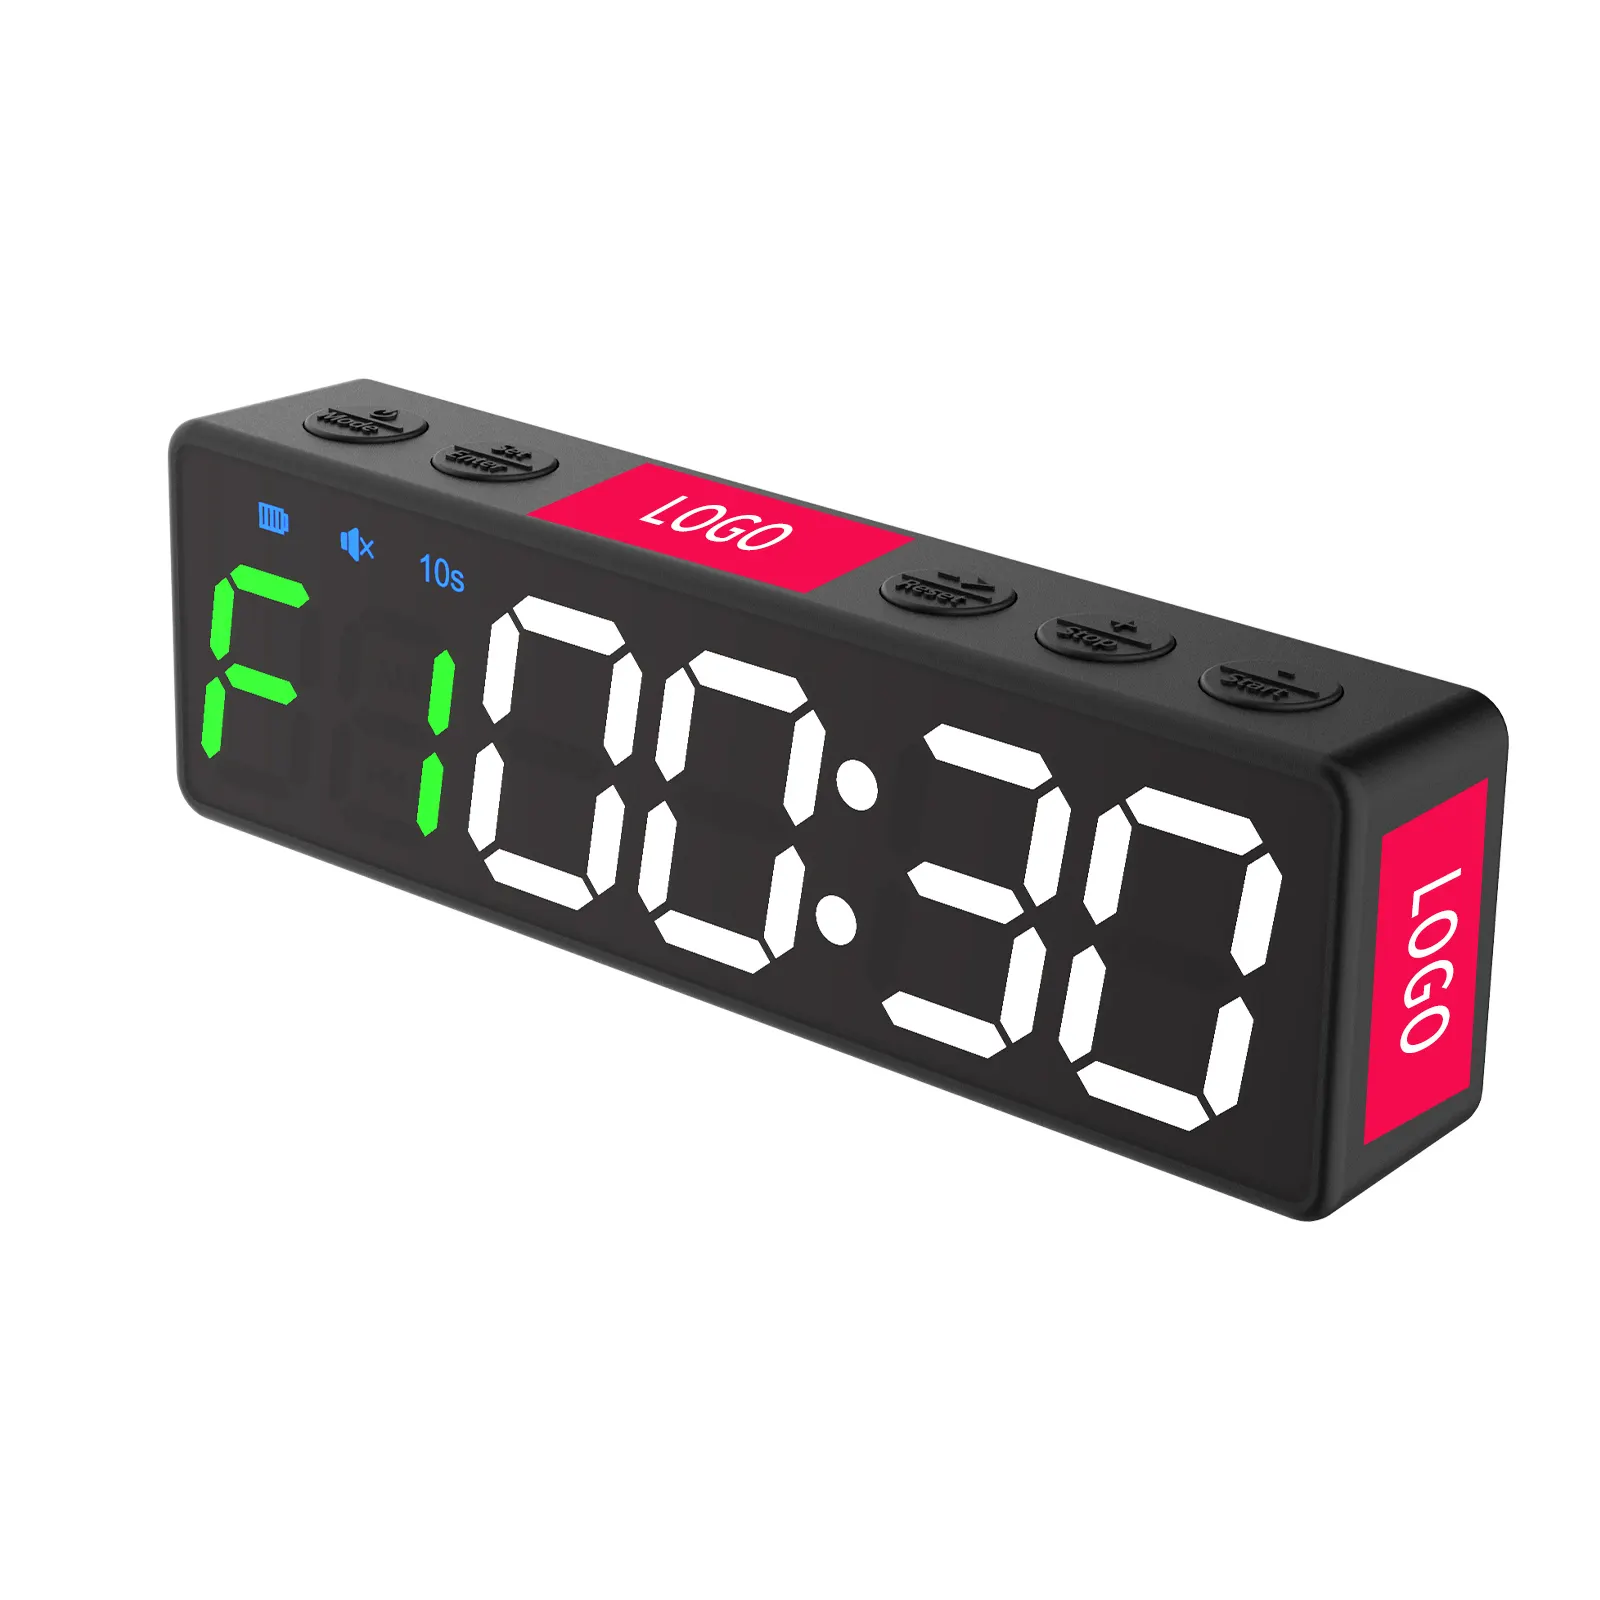 Super Promotional Smart Interval Mini Clock Digital Countdown Stopwatch Timer for Home Gym